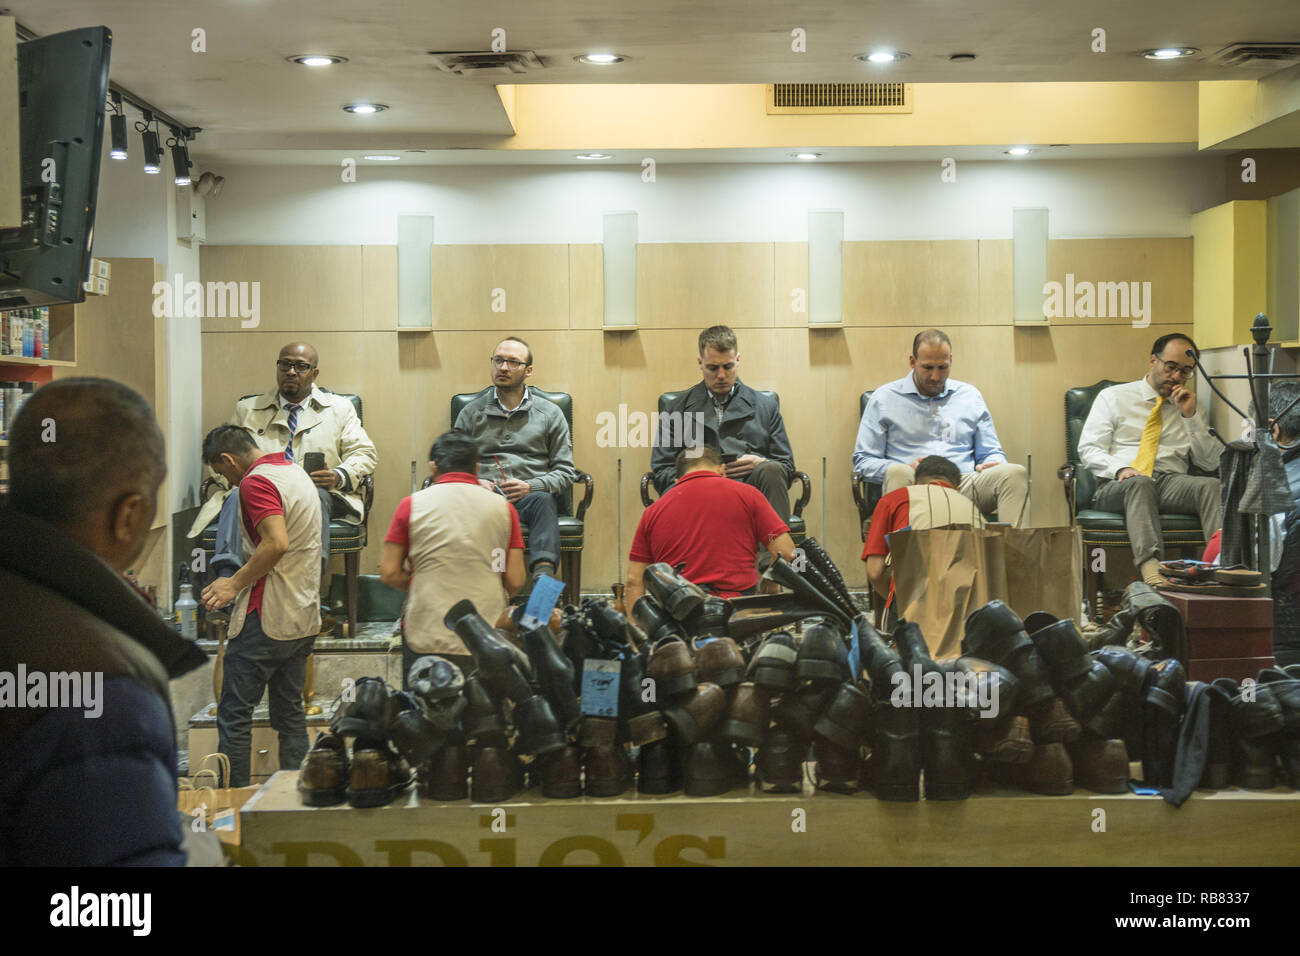 Shoeshine shop in the underground shopping concourse at Rockefeller Center in midtown Manhattan, New York City. Stock Photo